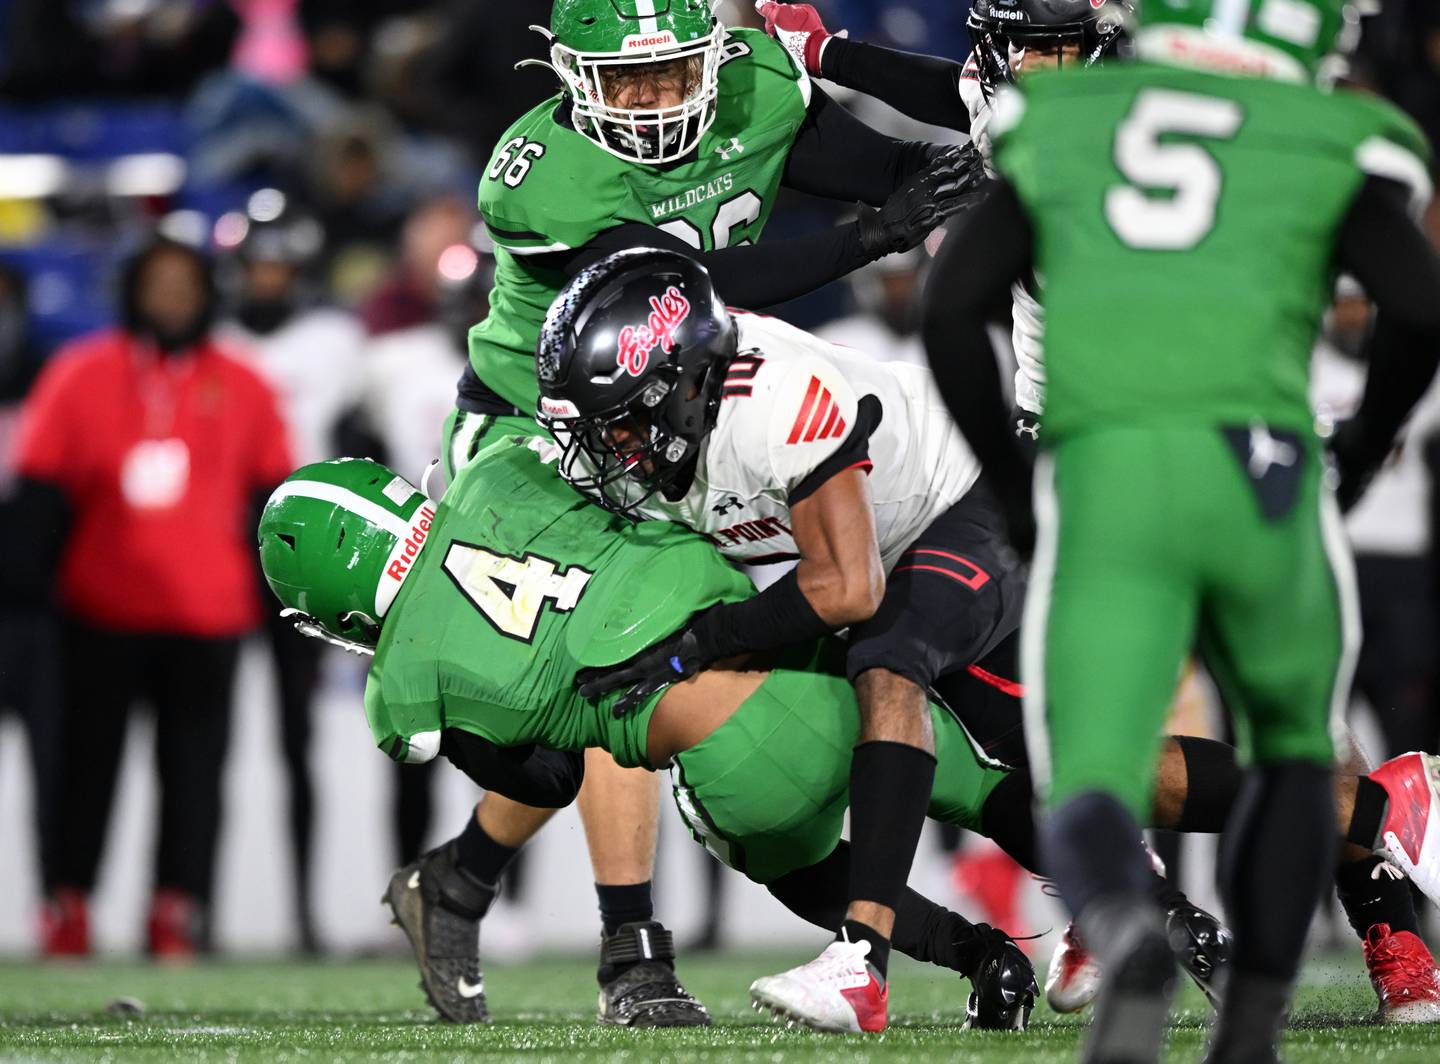 Arundel's Ahmad Taylor (4) is tackled by North Point's Makai Young during Friday's Class 4A/3A state football championship game. The No. 10 Wildcats were unable to climb out of a 17-0 first quarter deficit, falling 31-14 to the Charles County school at Navy-Marine Corps Memorial Stadium in Annapolis.